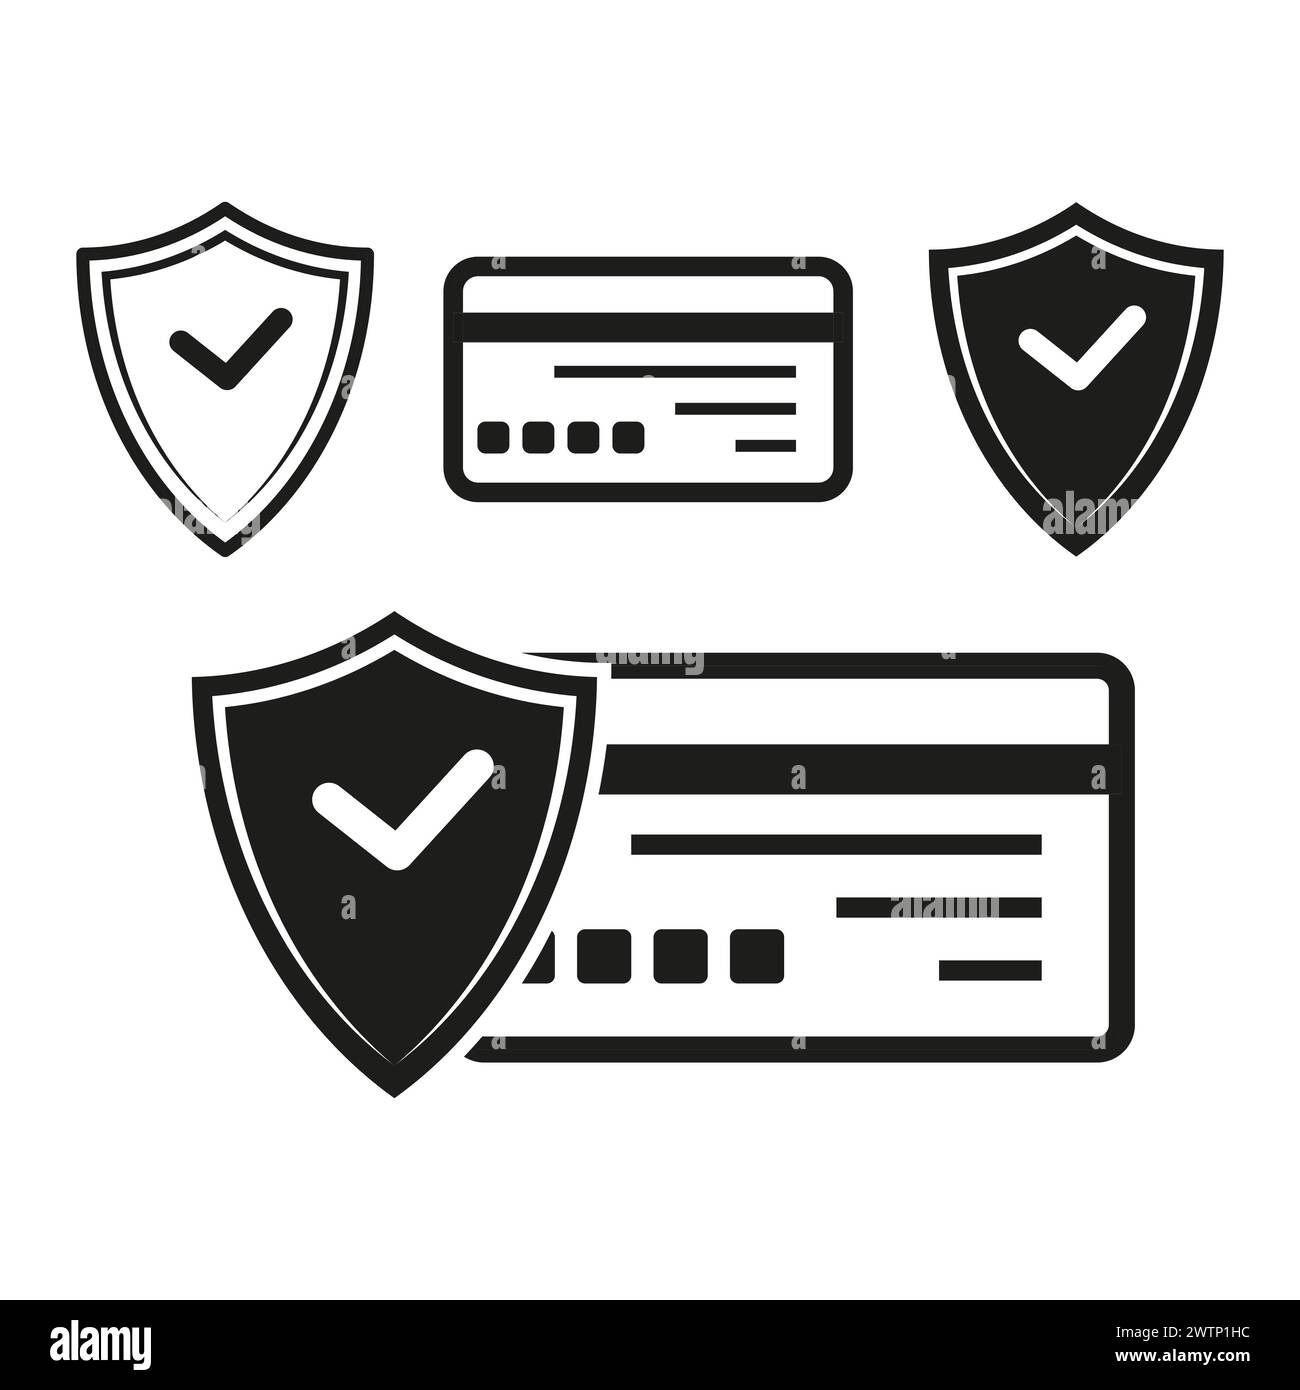 Secure payment icons set. Credit card protection symbols. Financial safety and verification concept. Vector illustration. EPS 10. Stock Vector